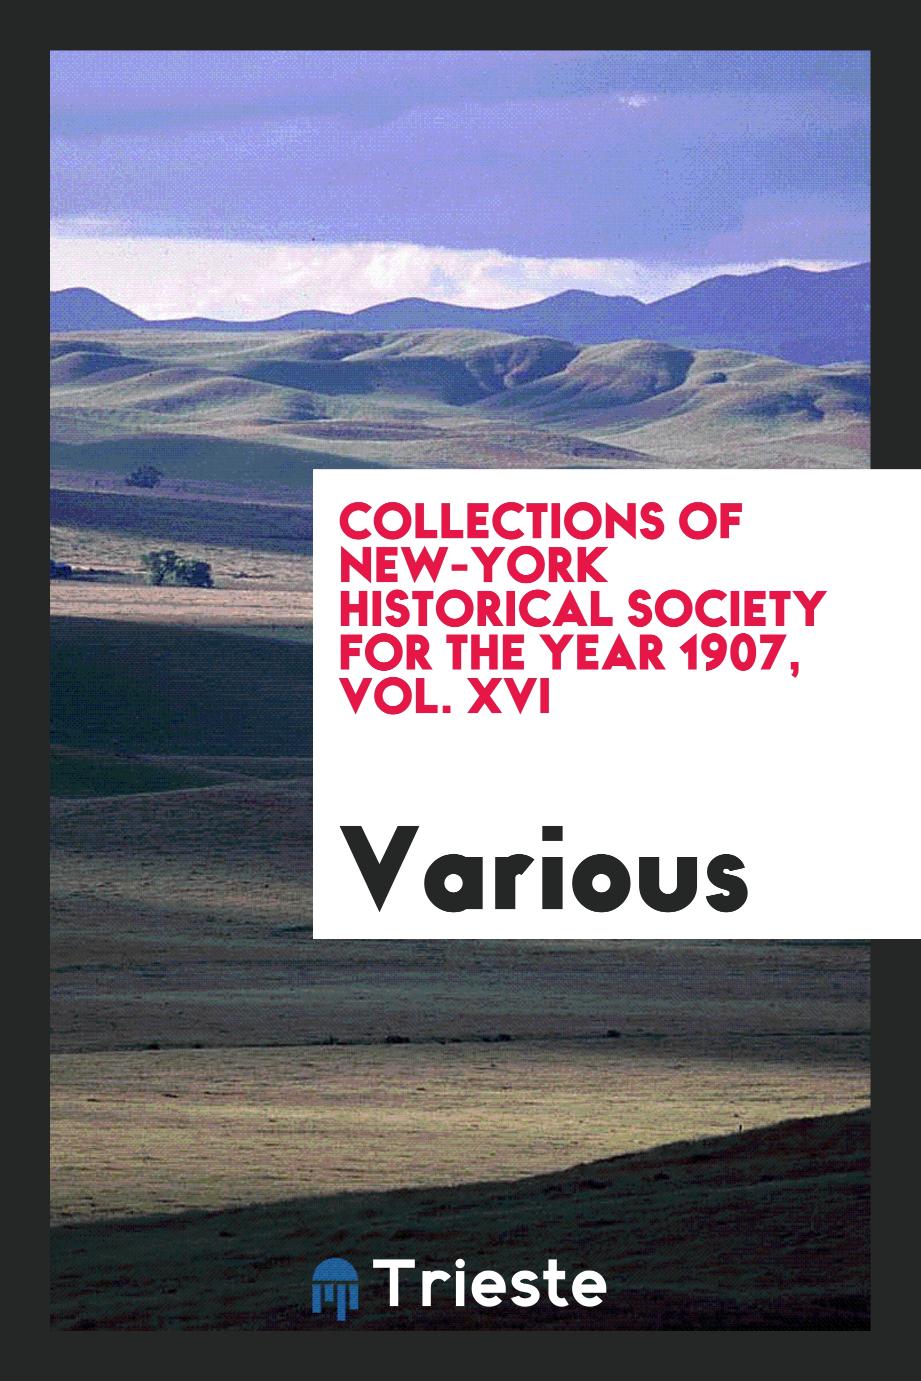 Collections of New-York Historical Society for the year 1907, Vol. XVI